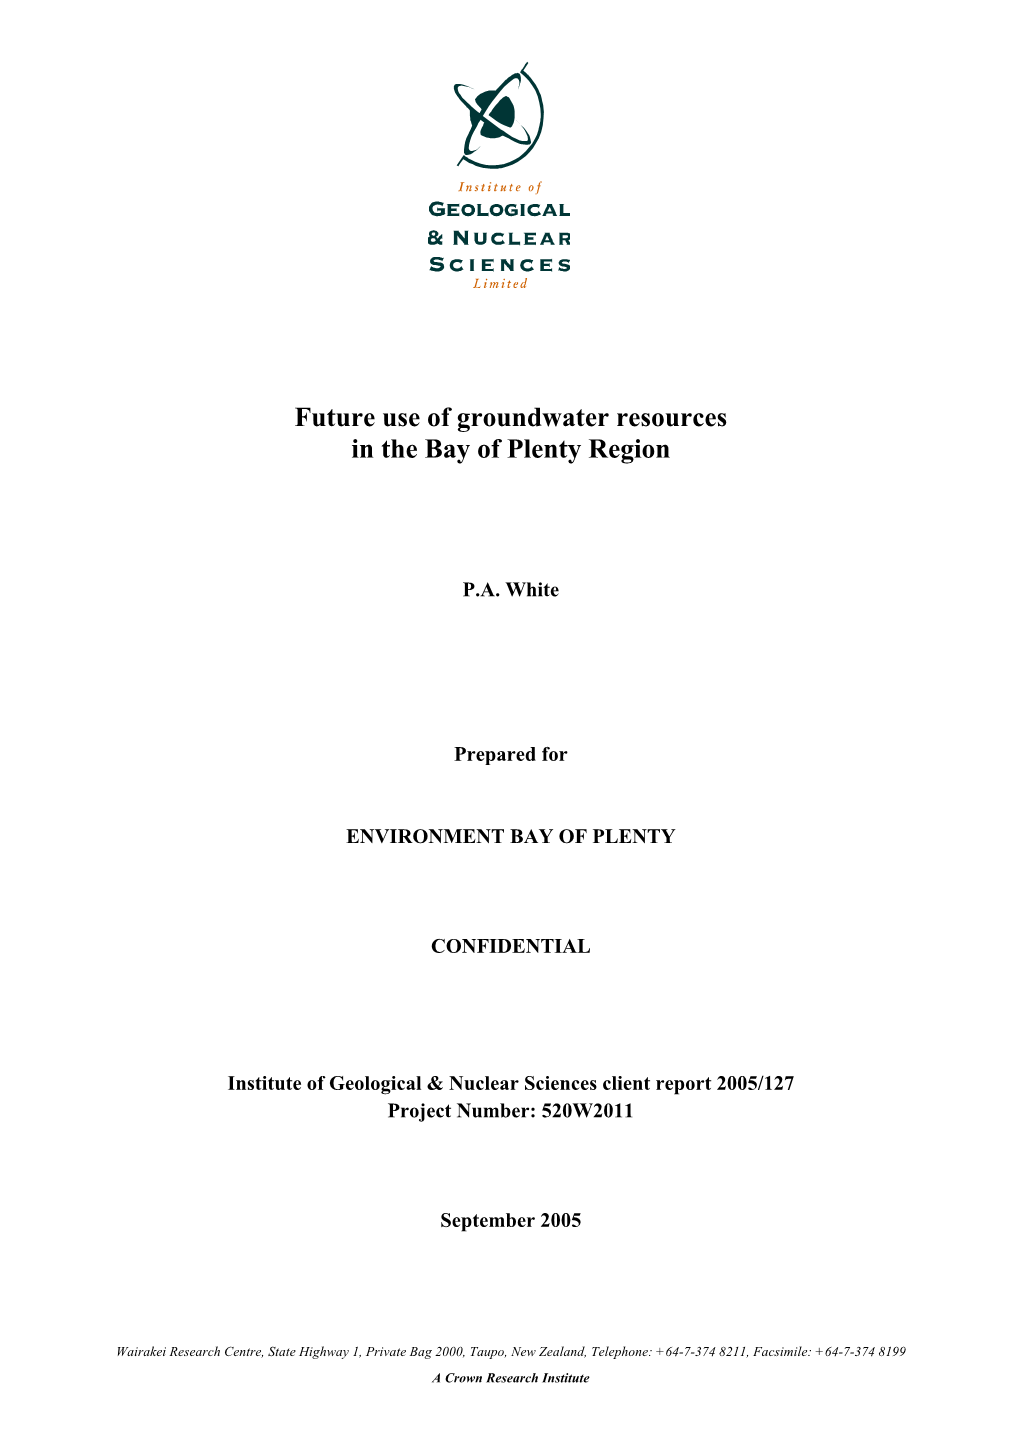 Future Use of Groundwater Resources in the Bay of Plenty Region